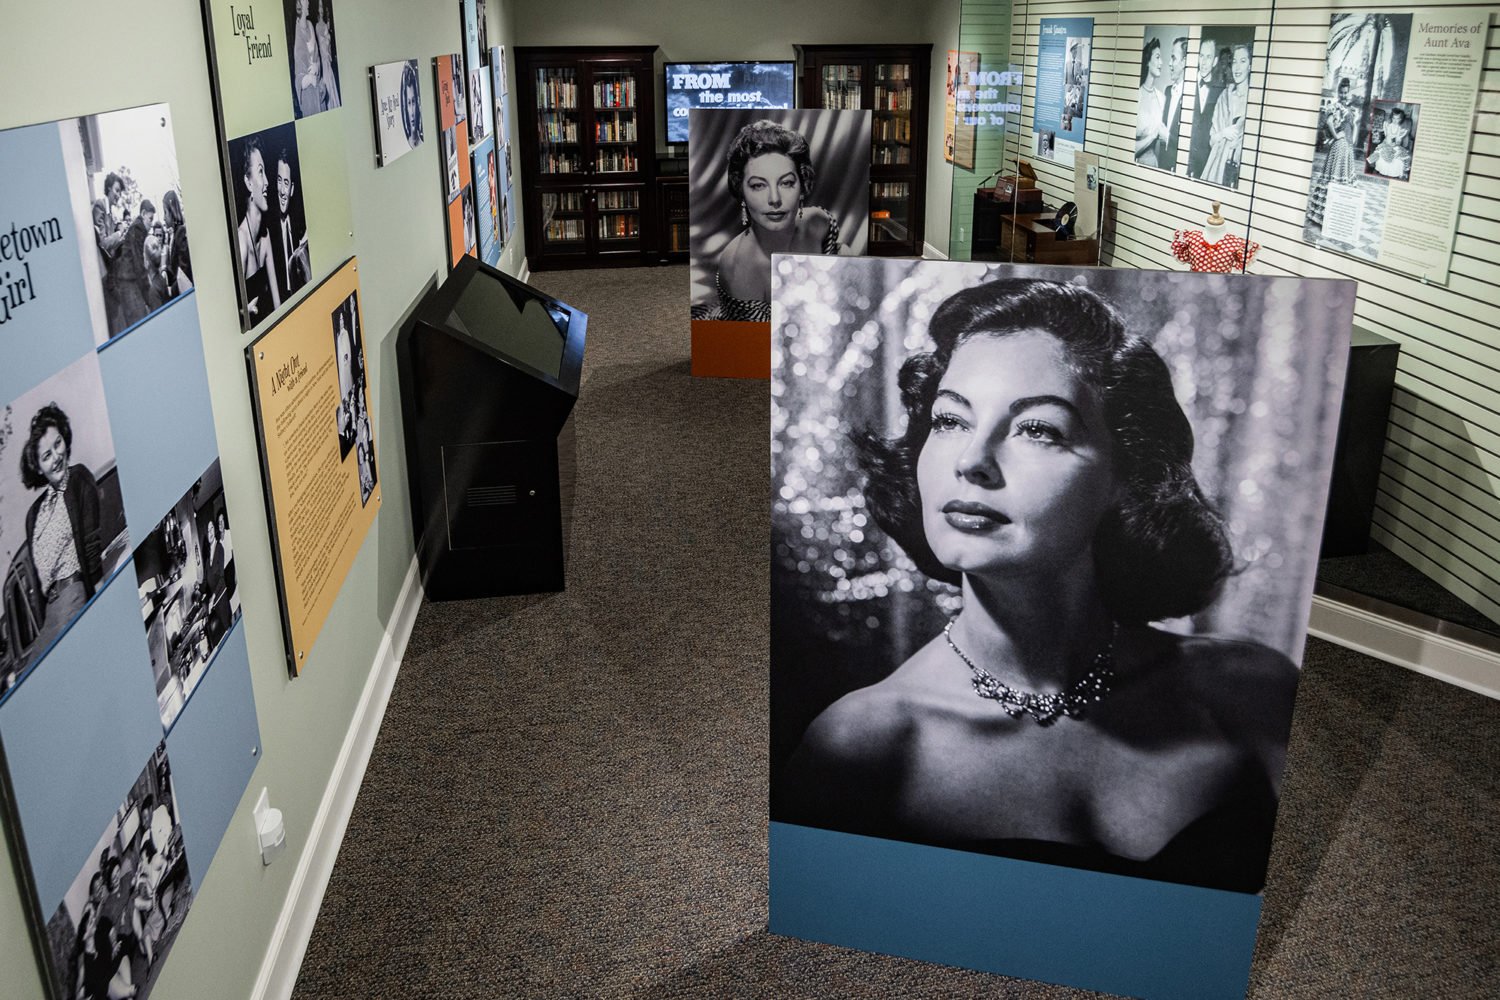 Plan Your Next Getaway Visiting This Old Hollywood-Inspired North Carolina Museum